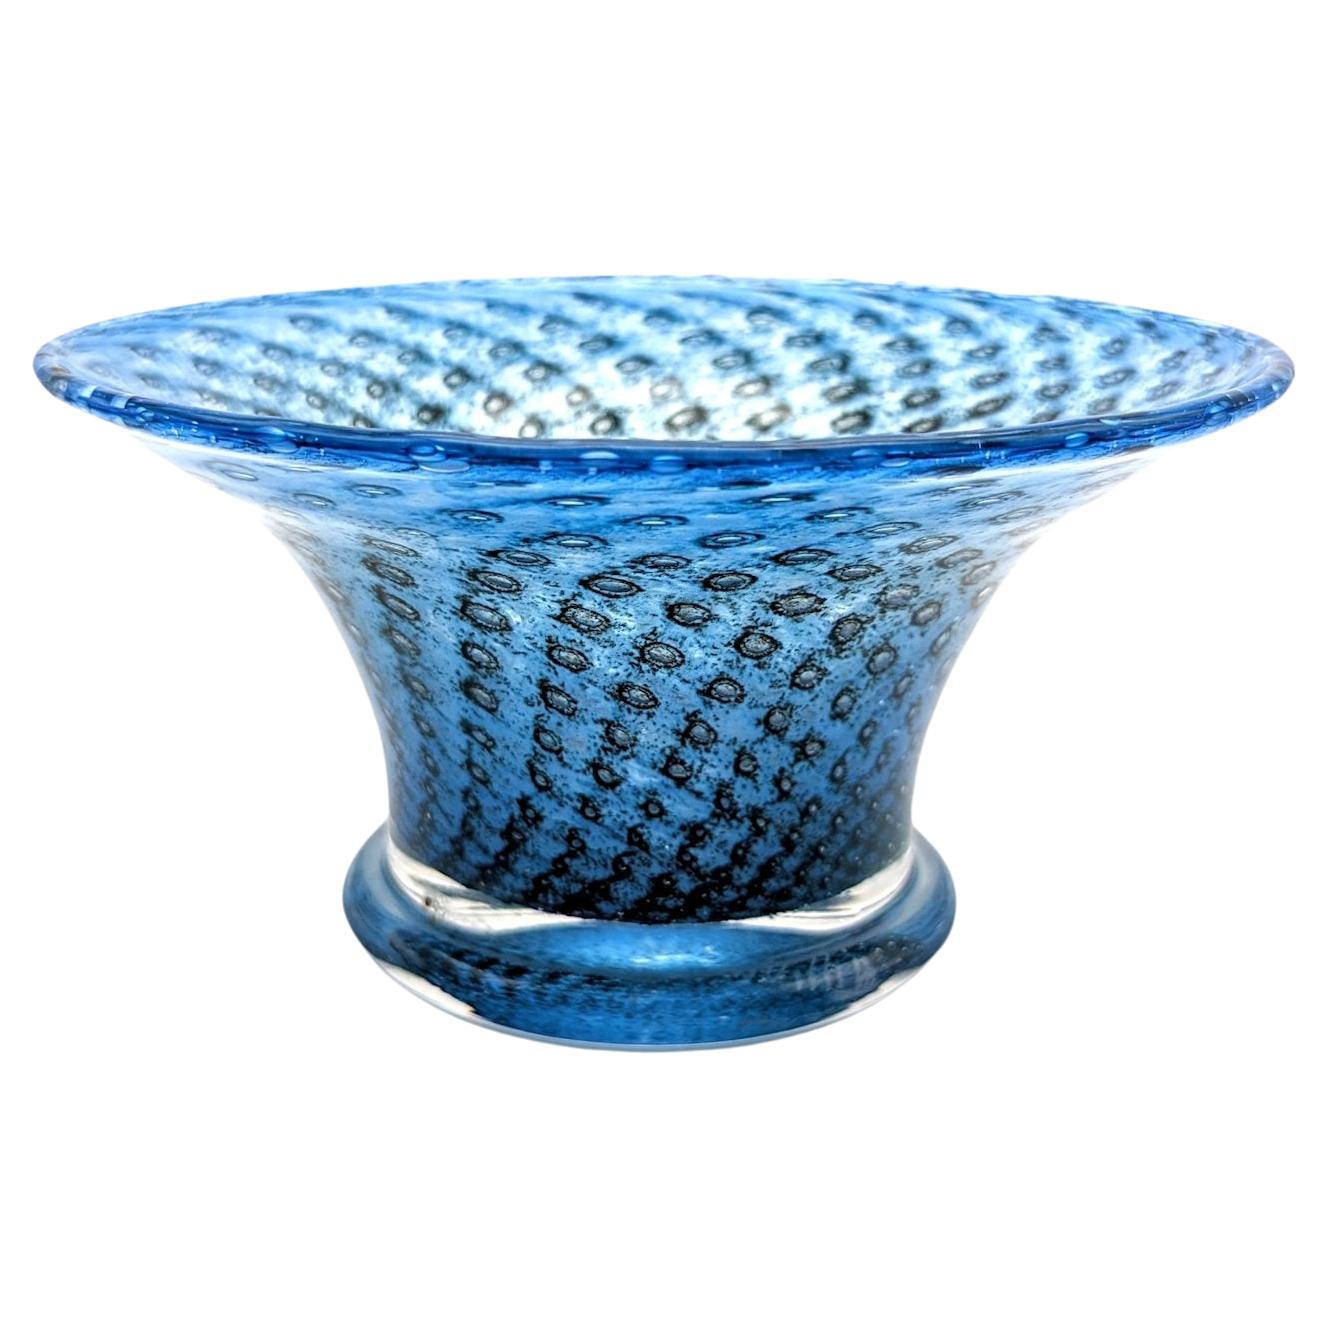 A footed bowl by Bertil Vallien for Boda with controlled bubble decor For Sale